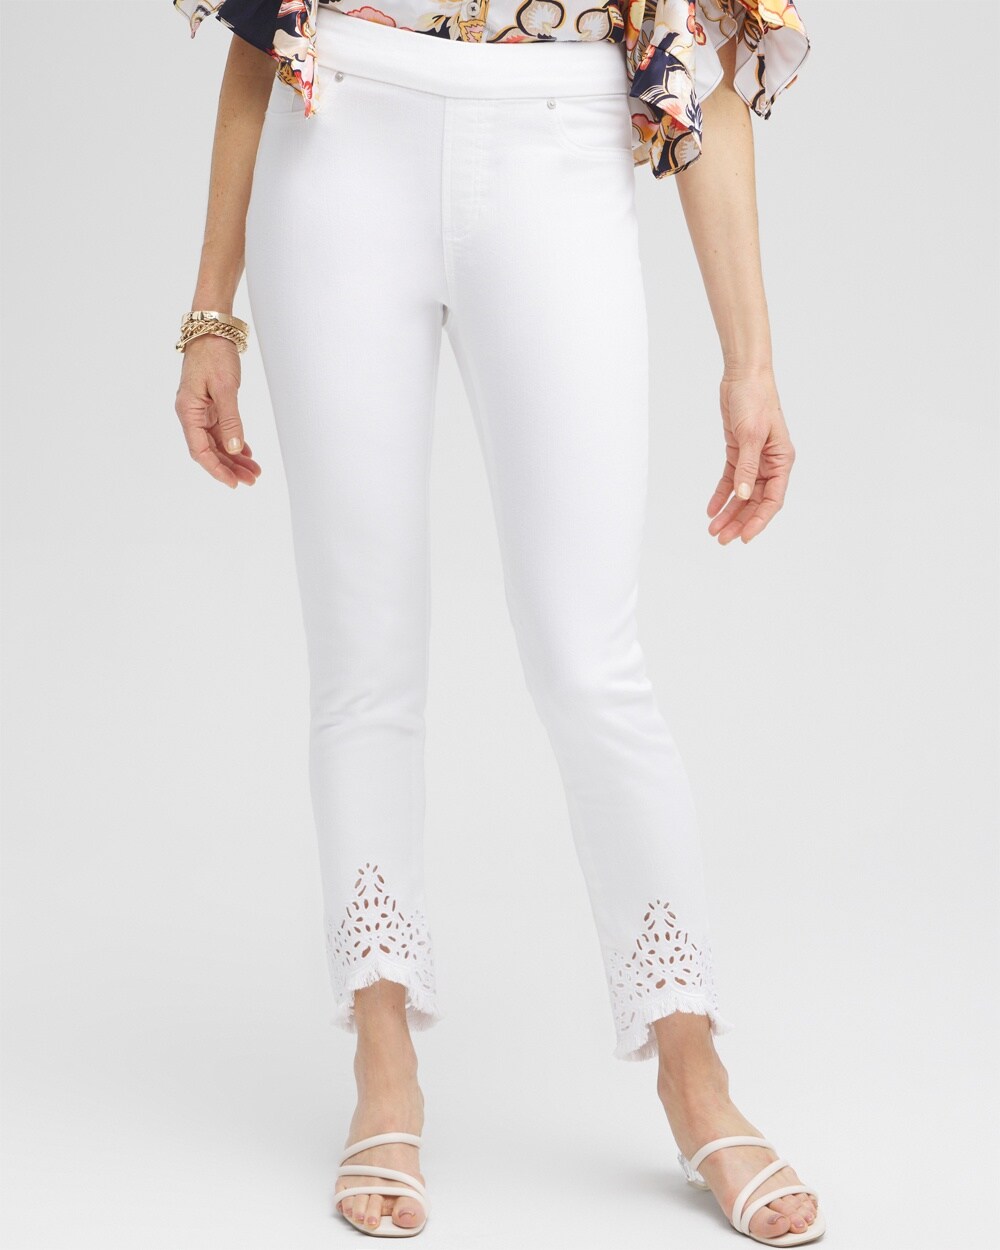 Chico's Eyelet Tulip Hem Pull-on Ankle Jeggings In White Size 8p/10p |